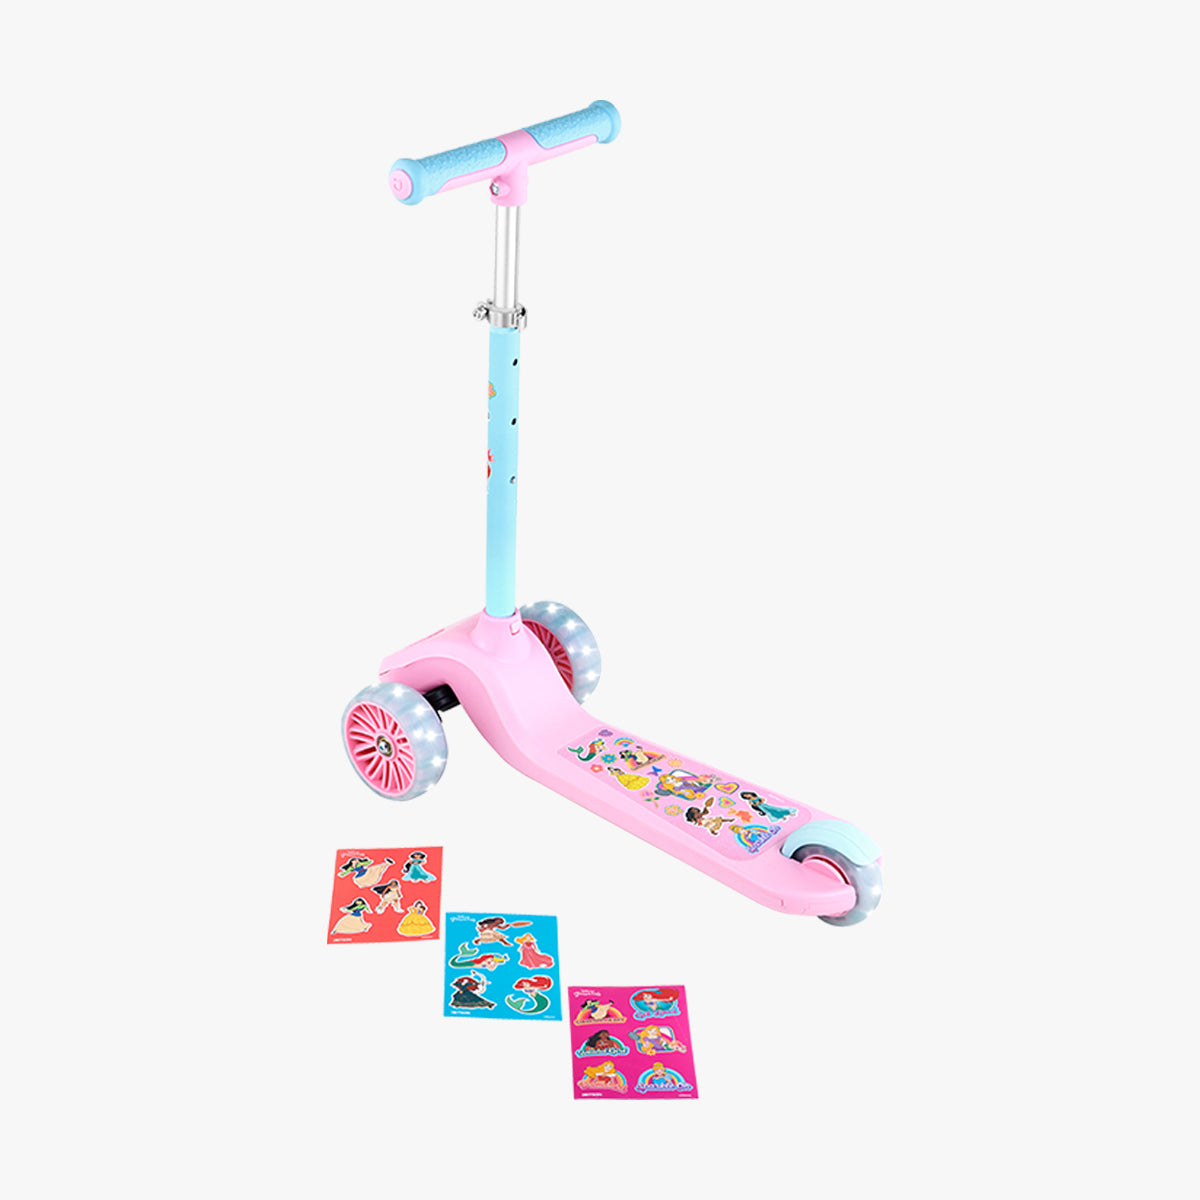 zoomed out view of the Disney Princesses Customizable Kick Scooter with the stickers that come with it